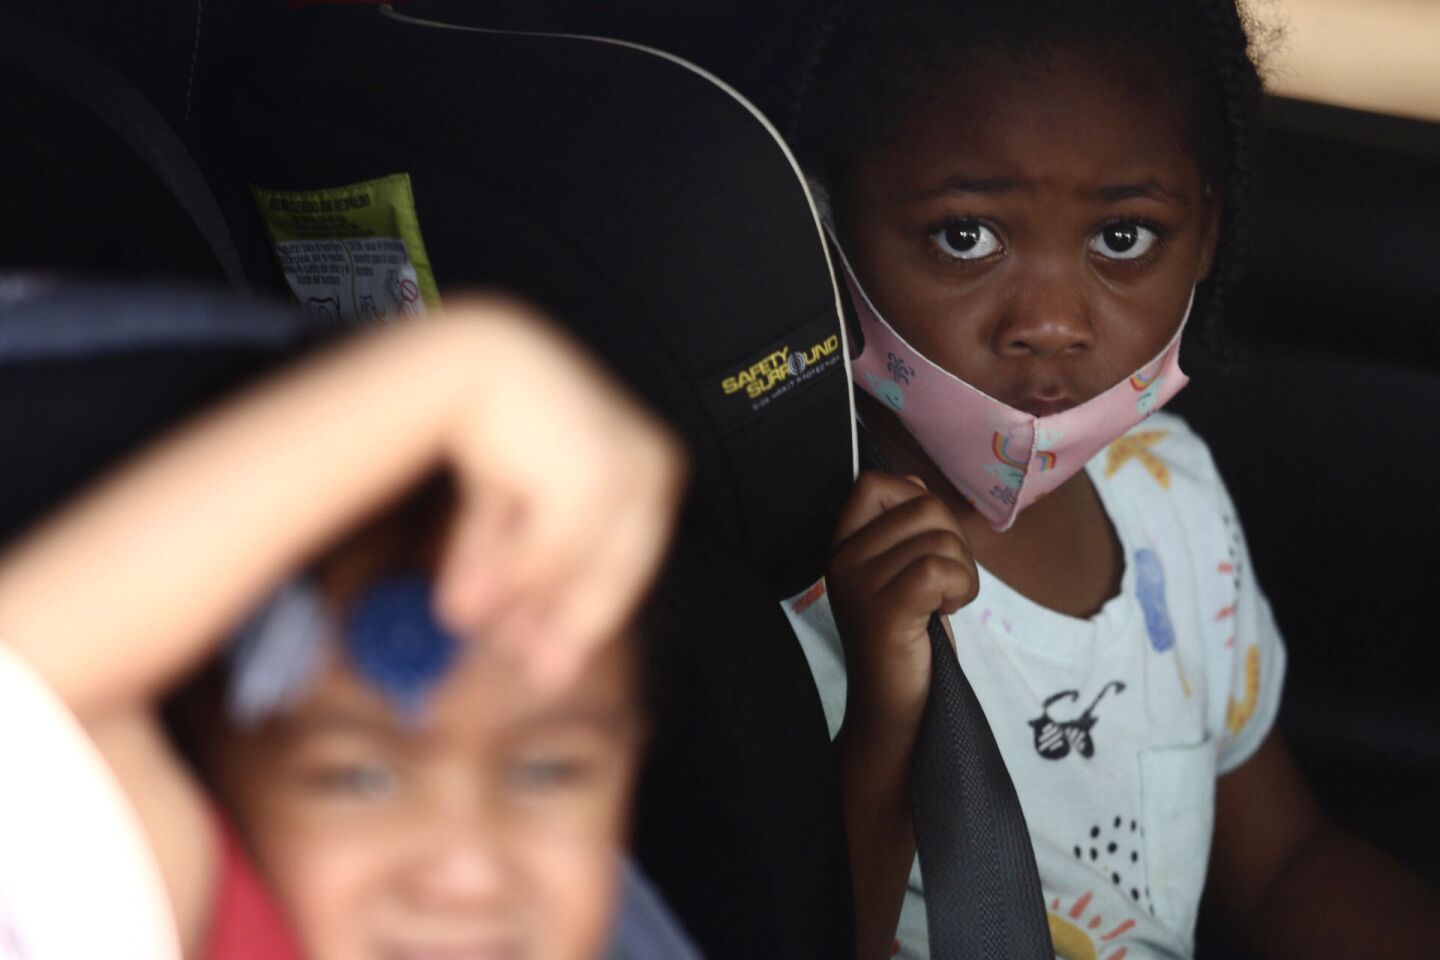 Carson residents Kaeli Burks, 3, left, and her cousin Bailey Watson, 5, look out the window of their car after their mothers helped them with self-testing at a drive-up testing site for COVID-19 in Carson.